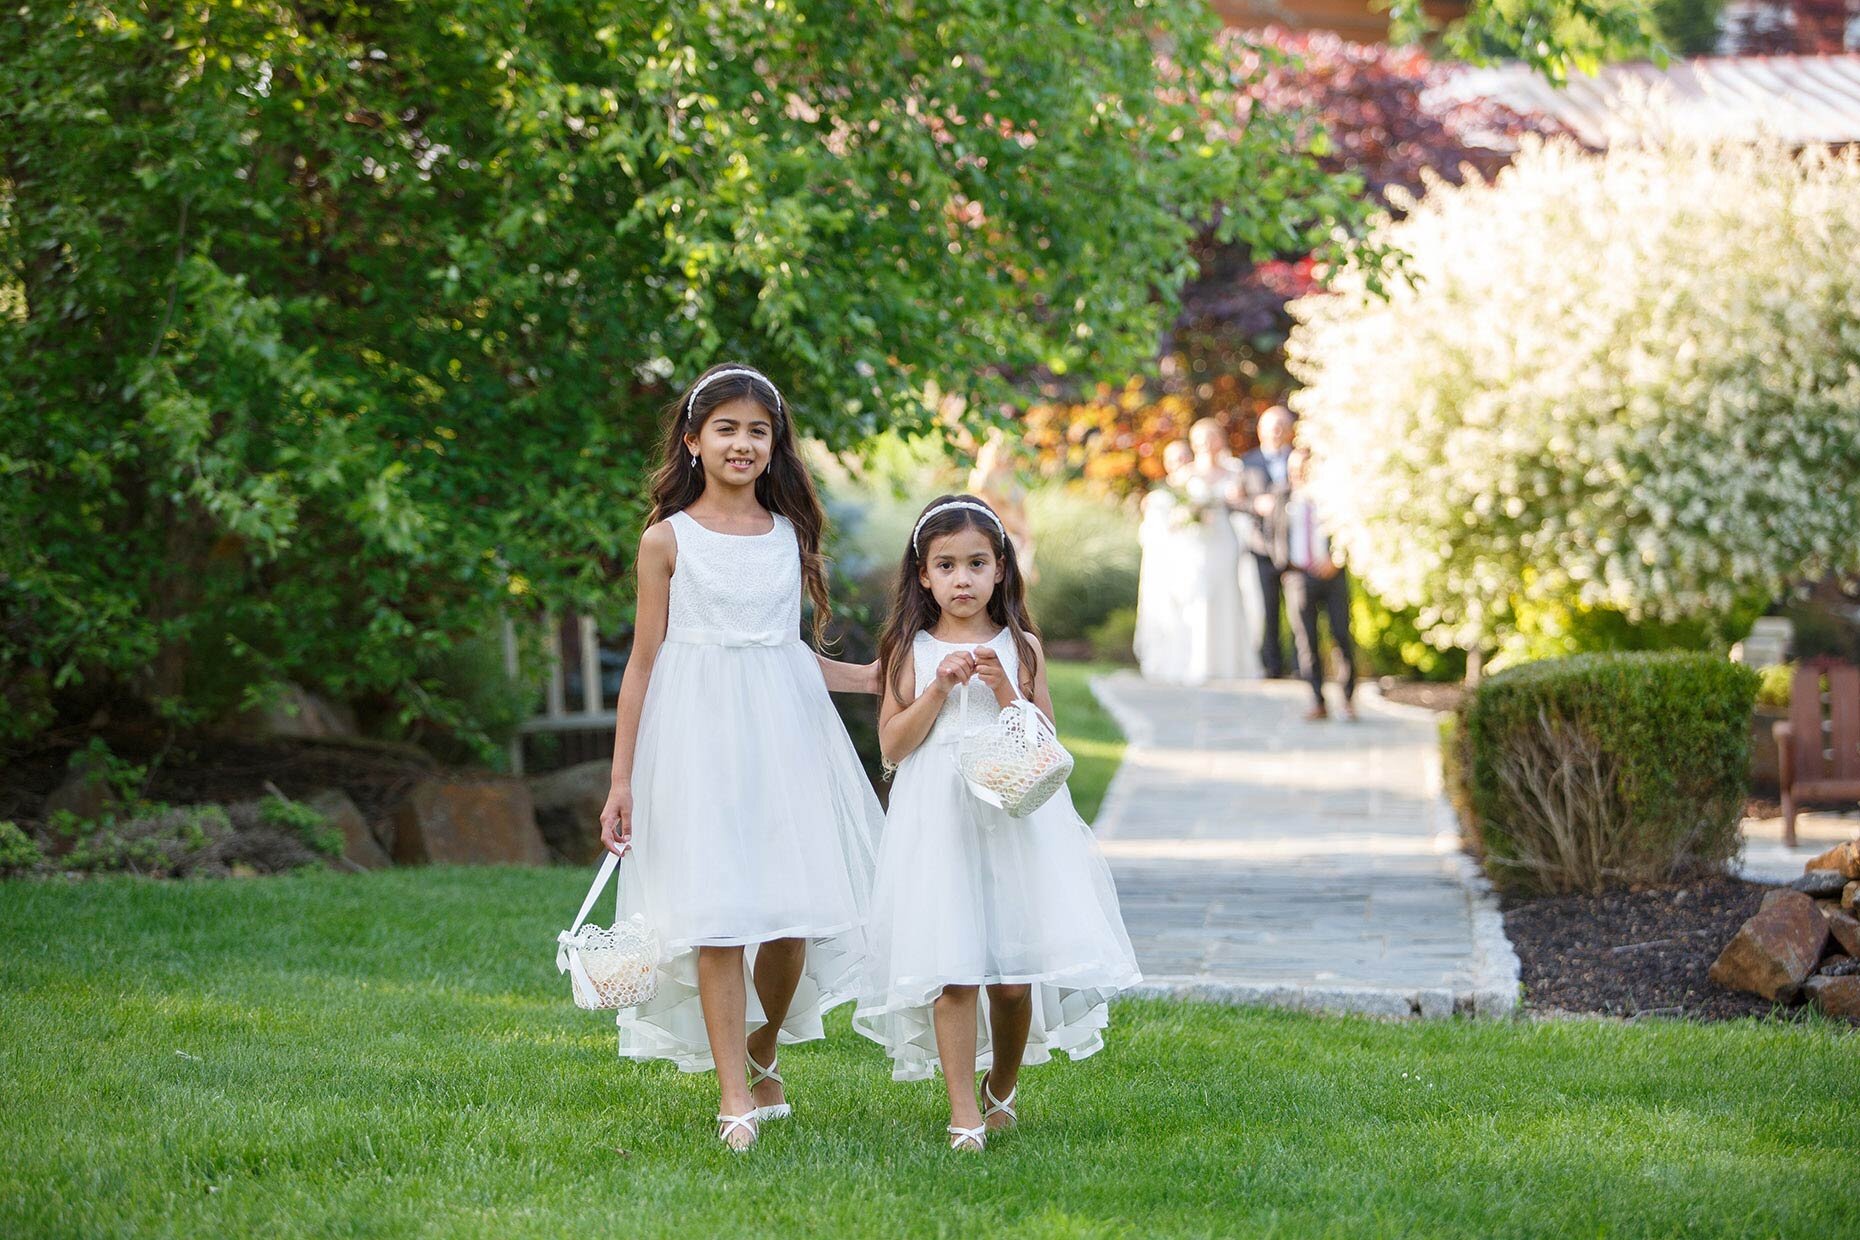 Flower Girls enter during processional